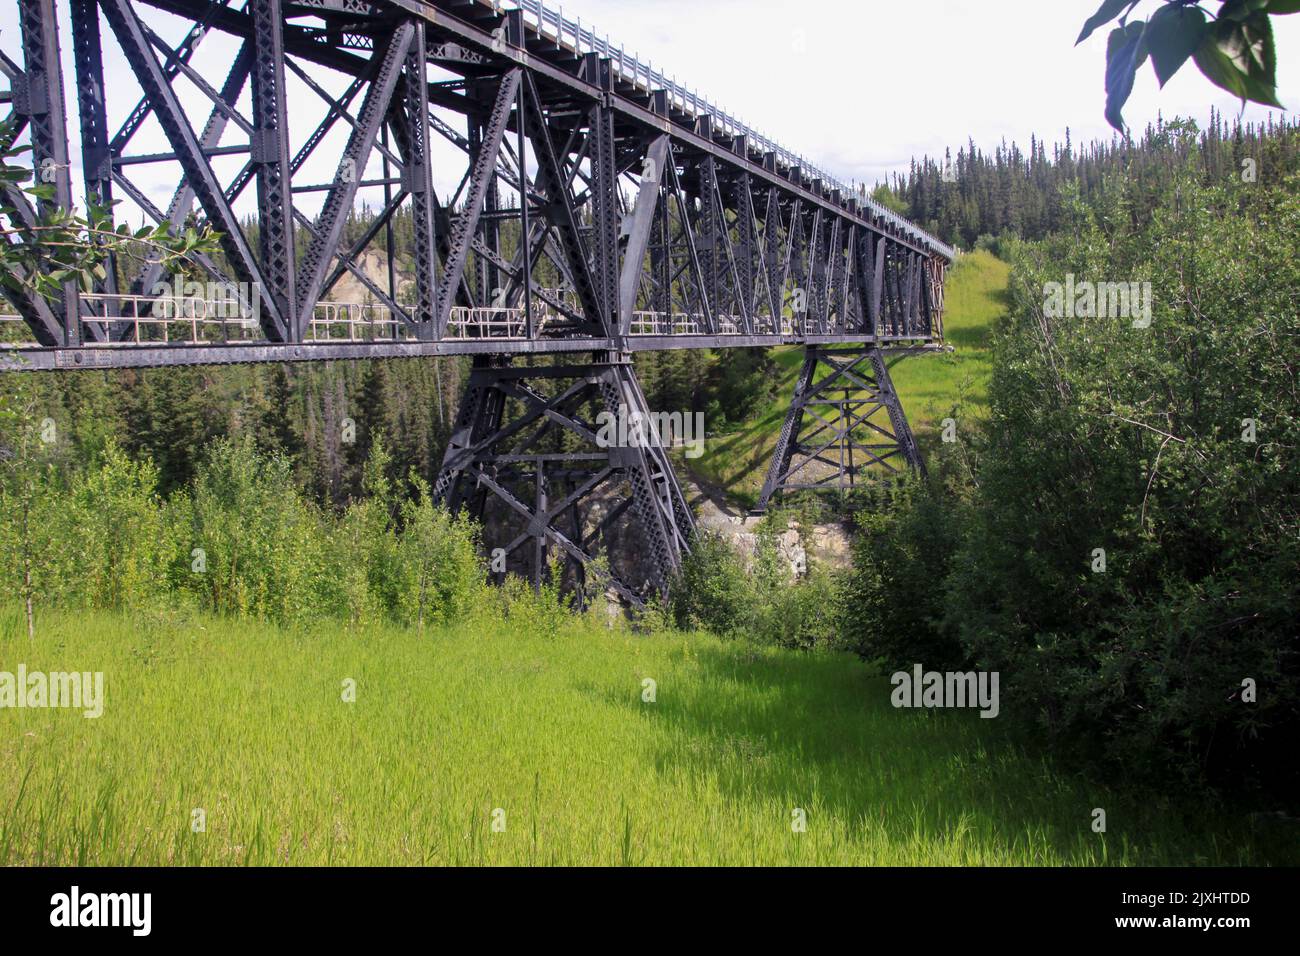 Kuskulana Bridge, built in 1910, spanning 238 feet (73 m) high above the Kuskulana River built by Copper River and Northwest Railroad to access the Ke Stock Photo